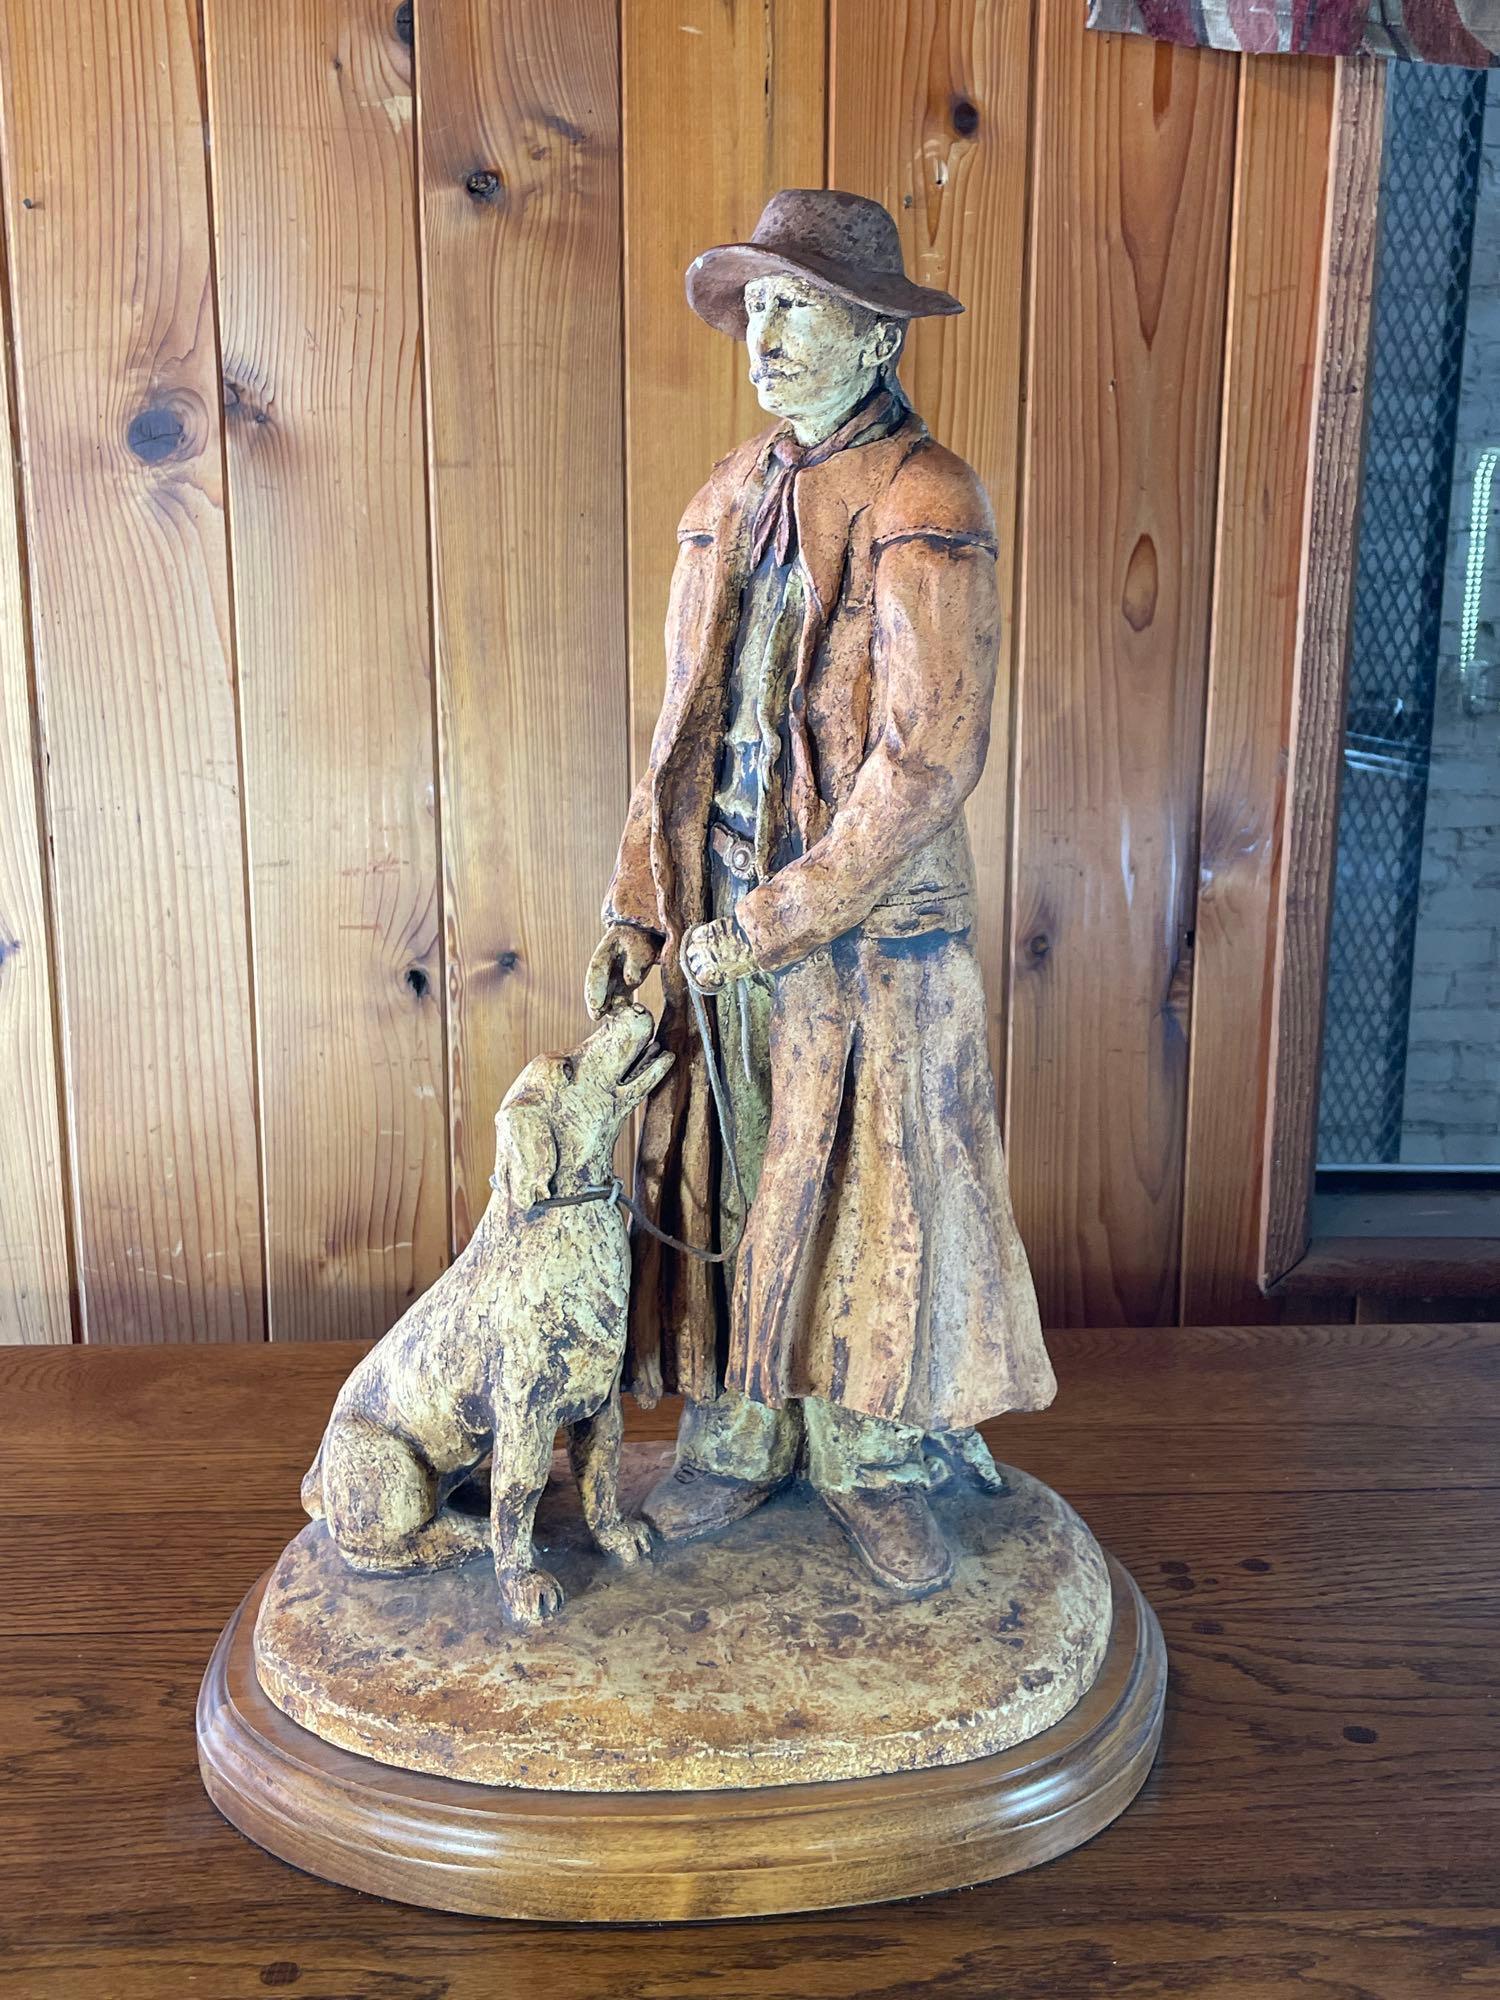 ...Original clay sculpture by Norman Frater, "The Drover"